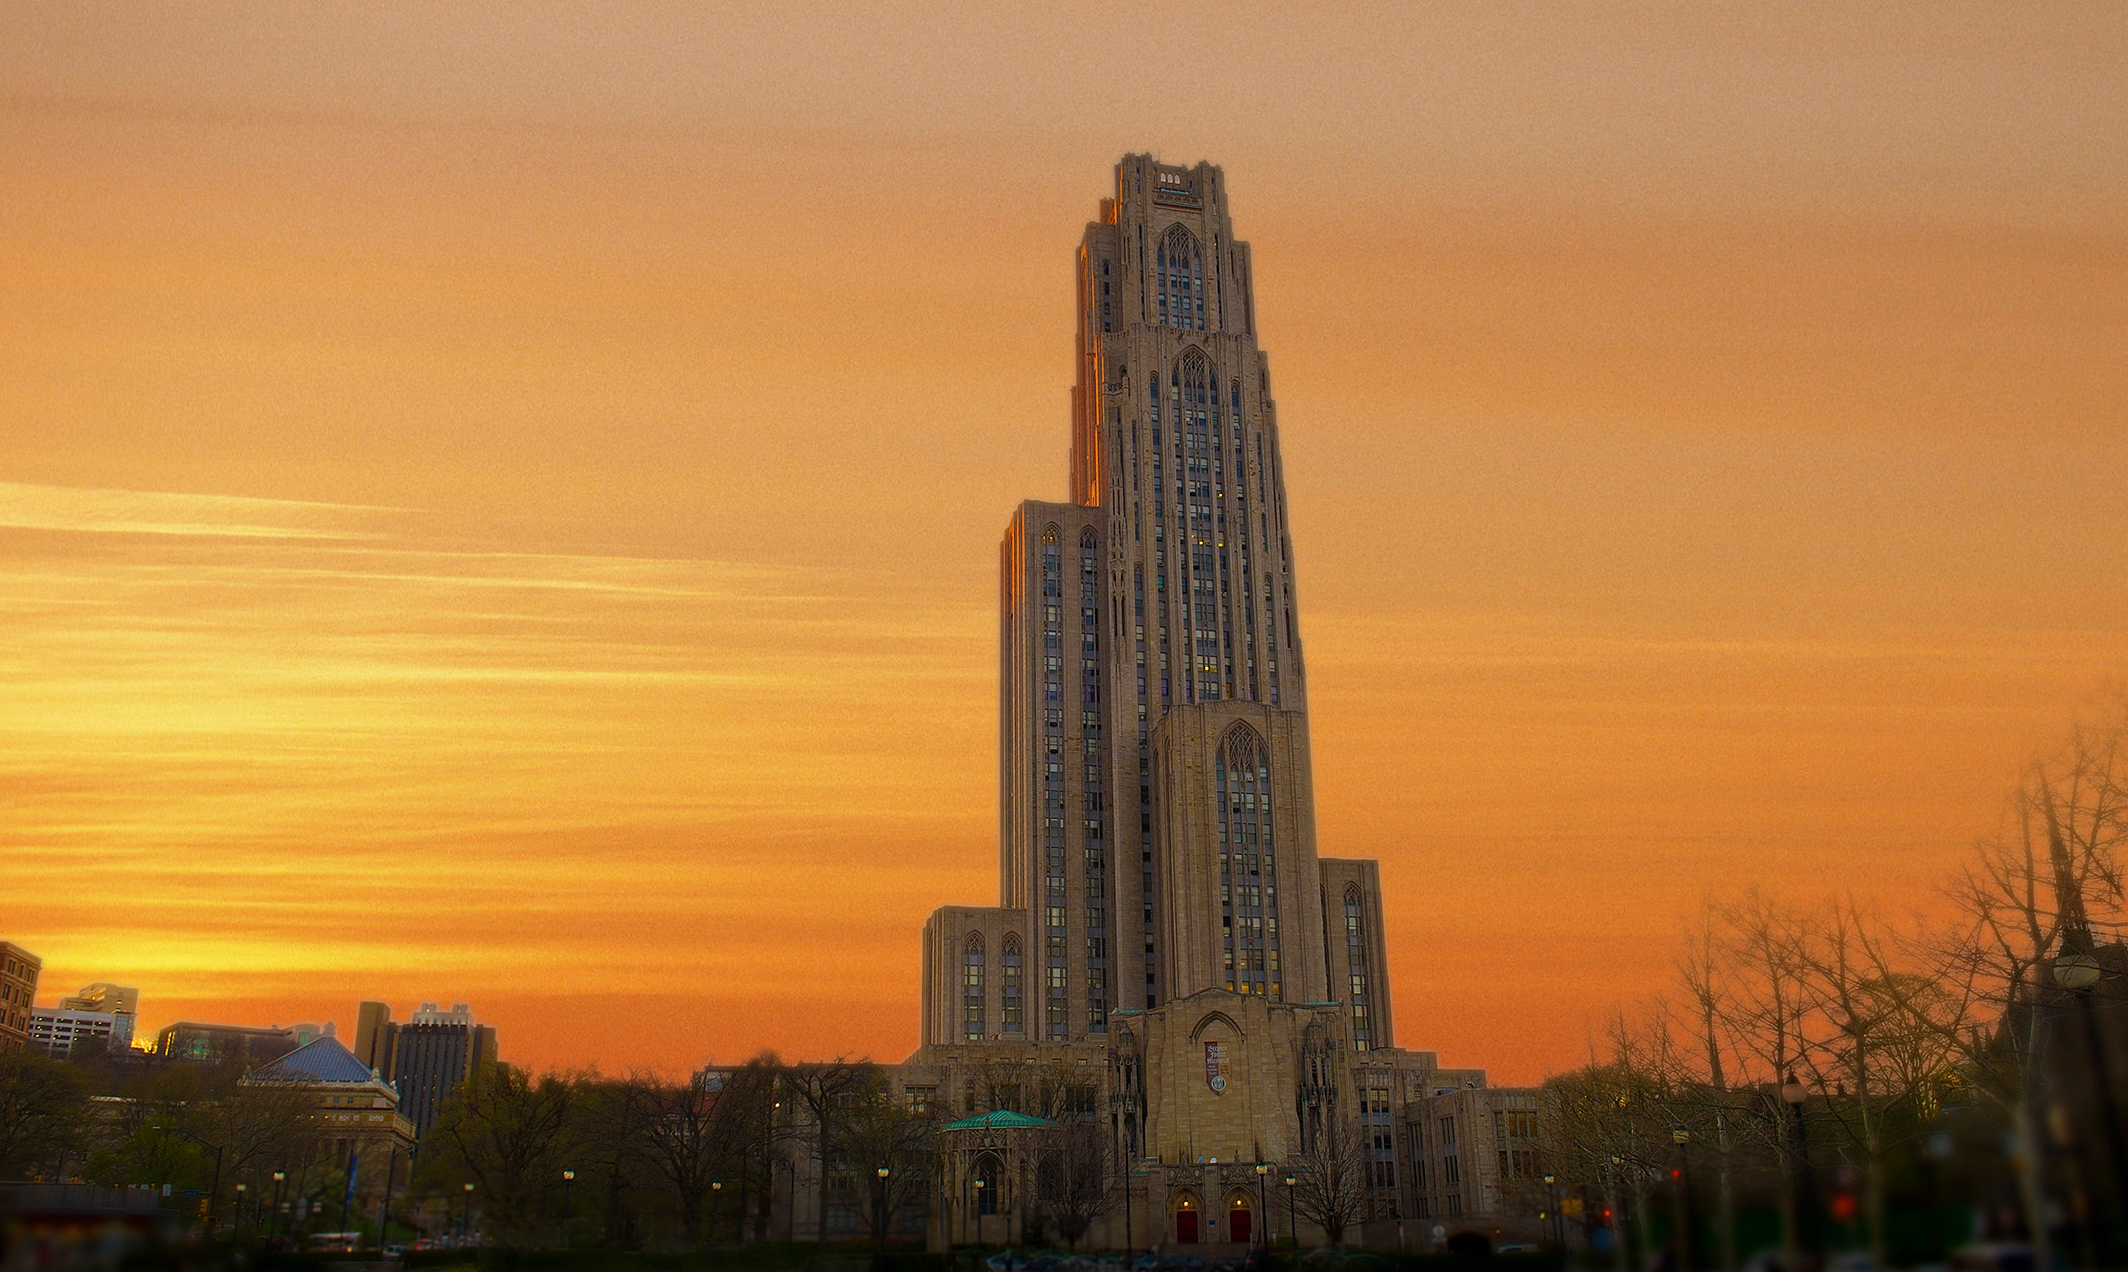 Cathedral of Learning on Pitt's campus